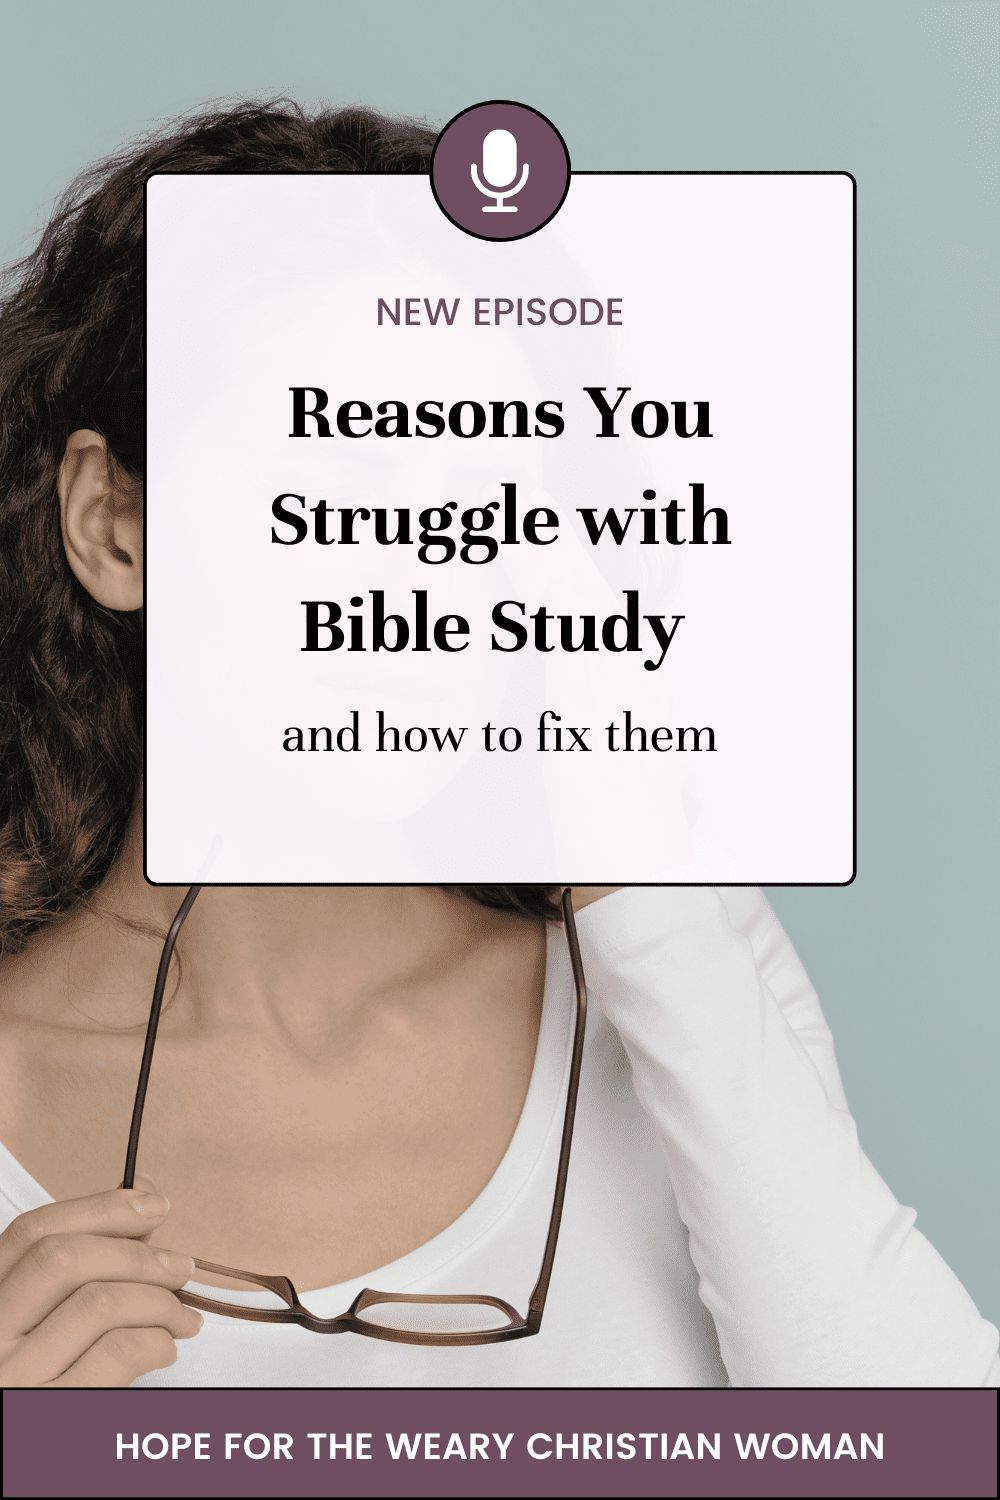 8 reasons bible study seems so hard + 8 solutions so that you can overcome the struggle and have consistent quiet time with God. When it comes to bible study for beginners and learning how to pray effectively so many thing can get in your way. Come learn how you can grow your faith so you can finally have the closer relationship God that you desire.